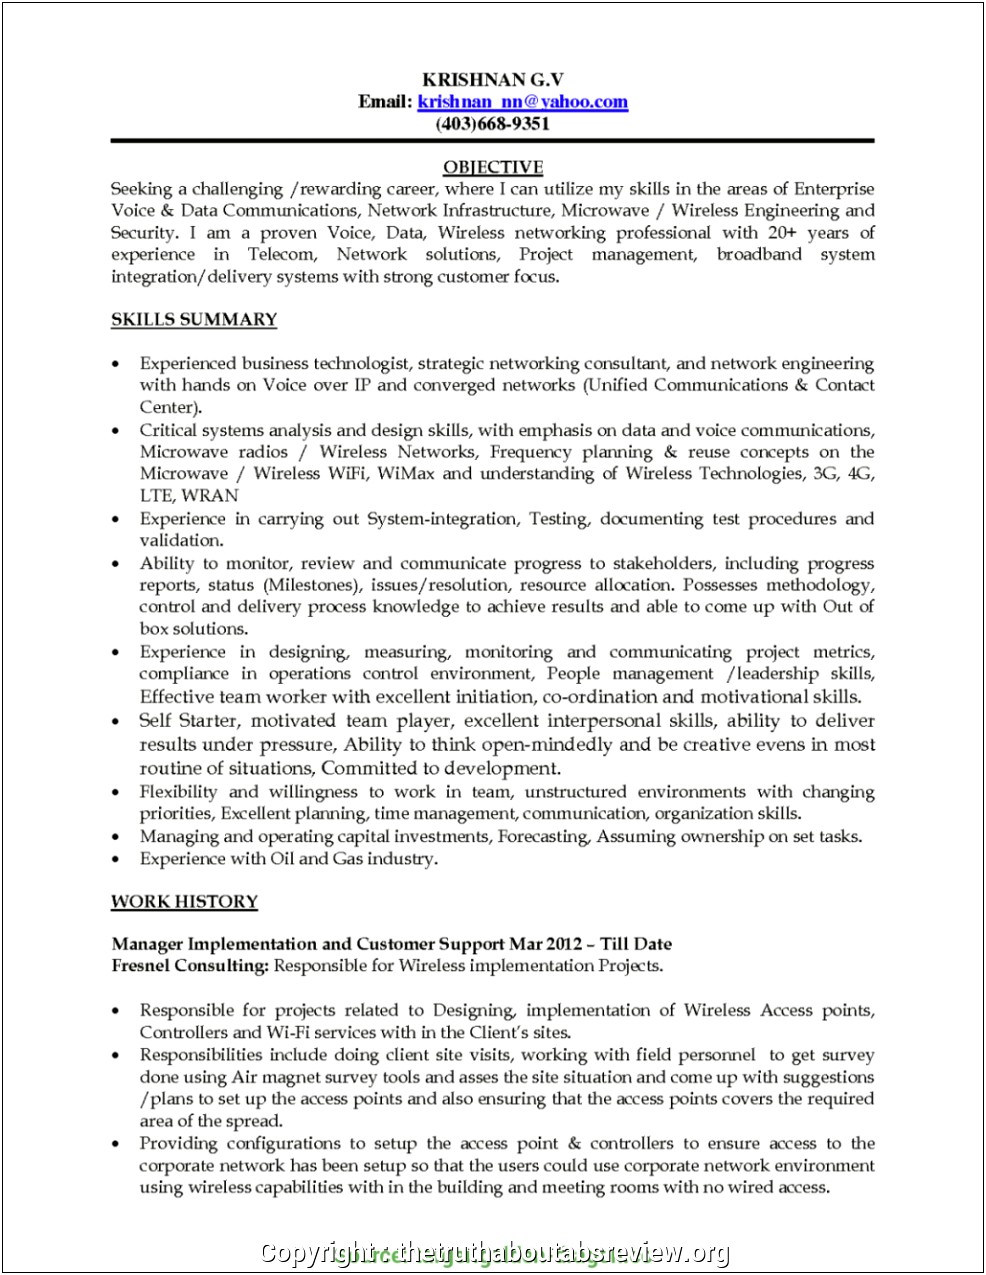 Telecom Project Manager Resume India